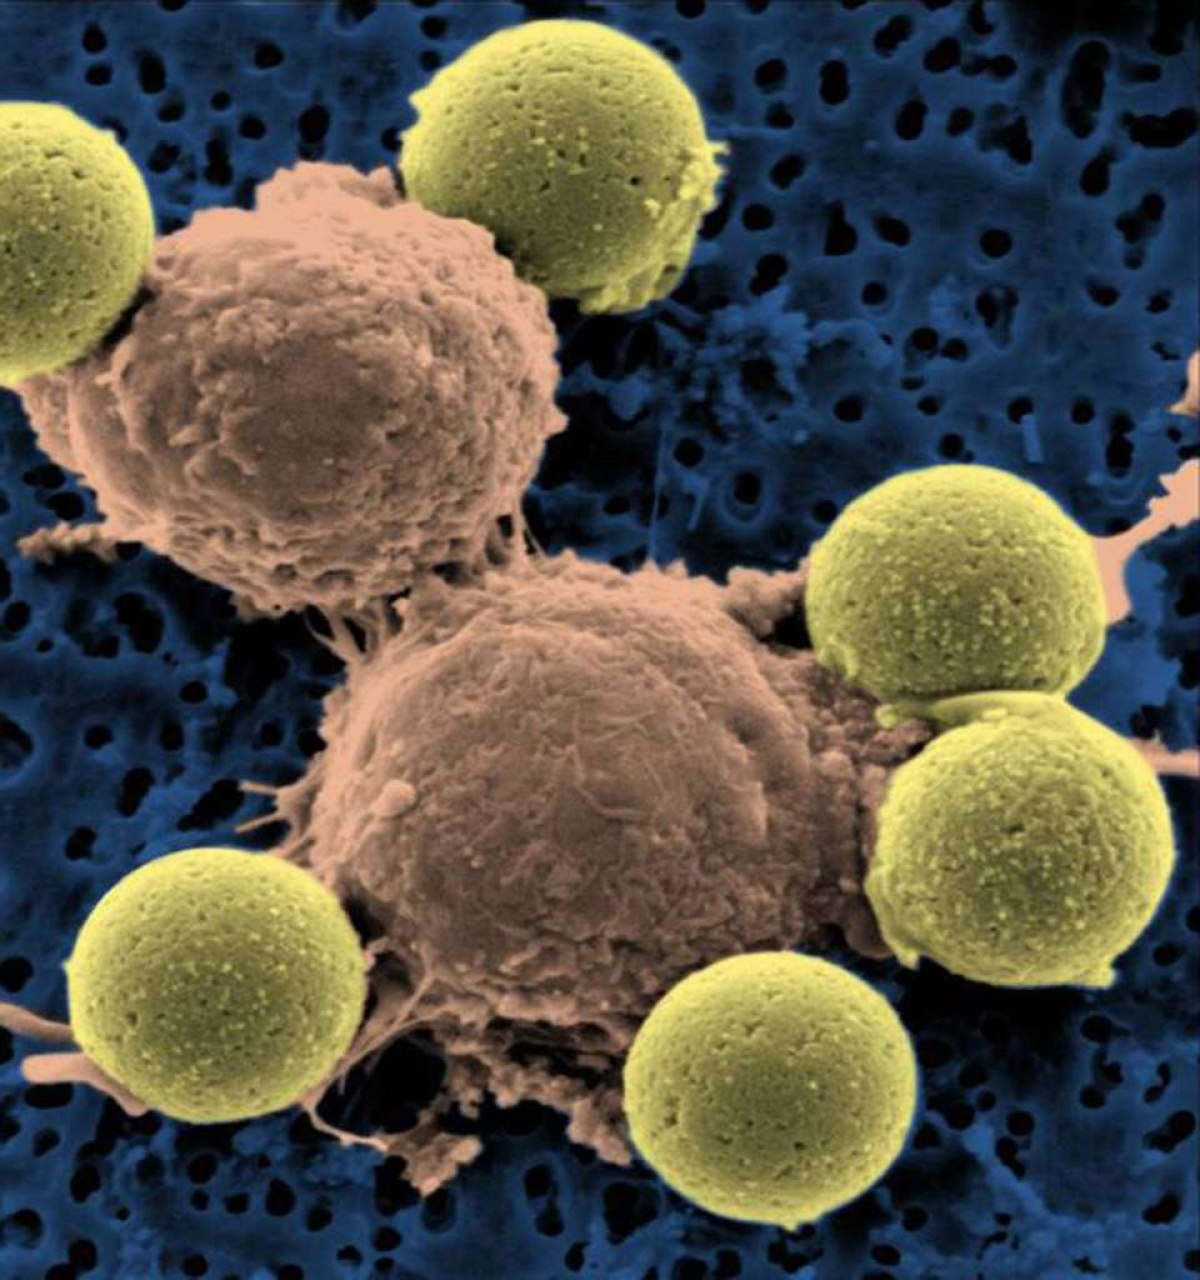 A microscope image shows the immune system cells called T cells binding to yellow beads, a process that causes the cells to divide. A new report on cancer research highlights recent efforts to harness the body's own immune system to fight cancer, which still kills more than half a million Americans every year.